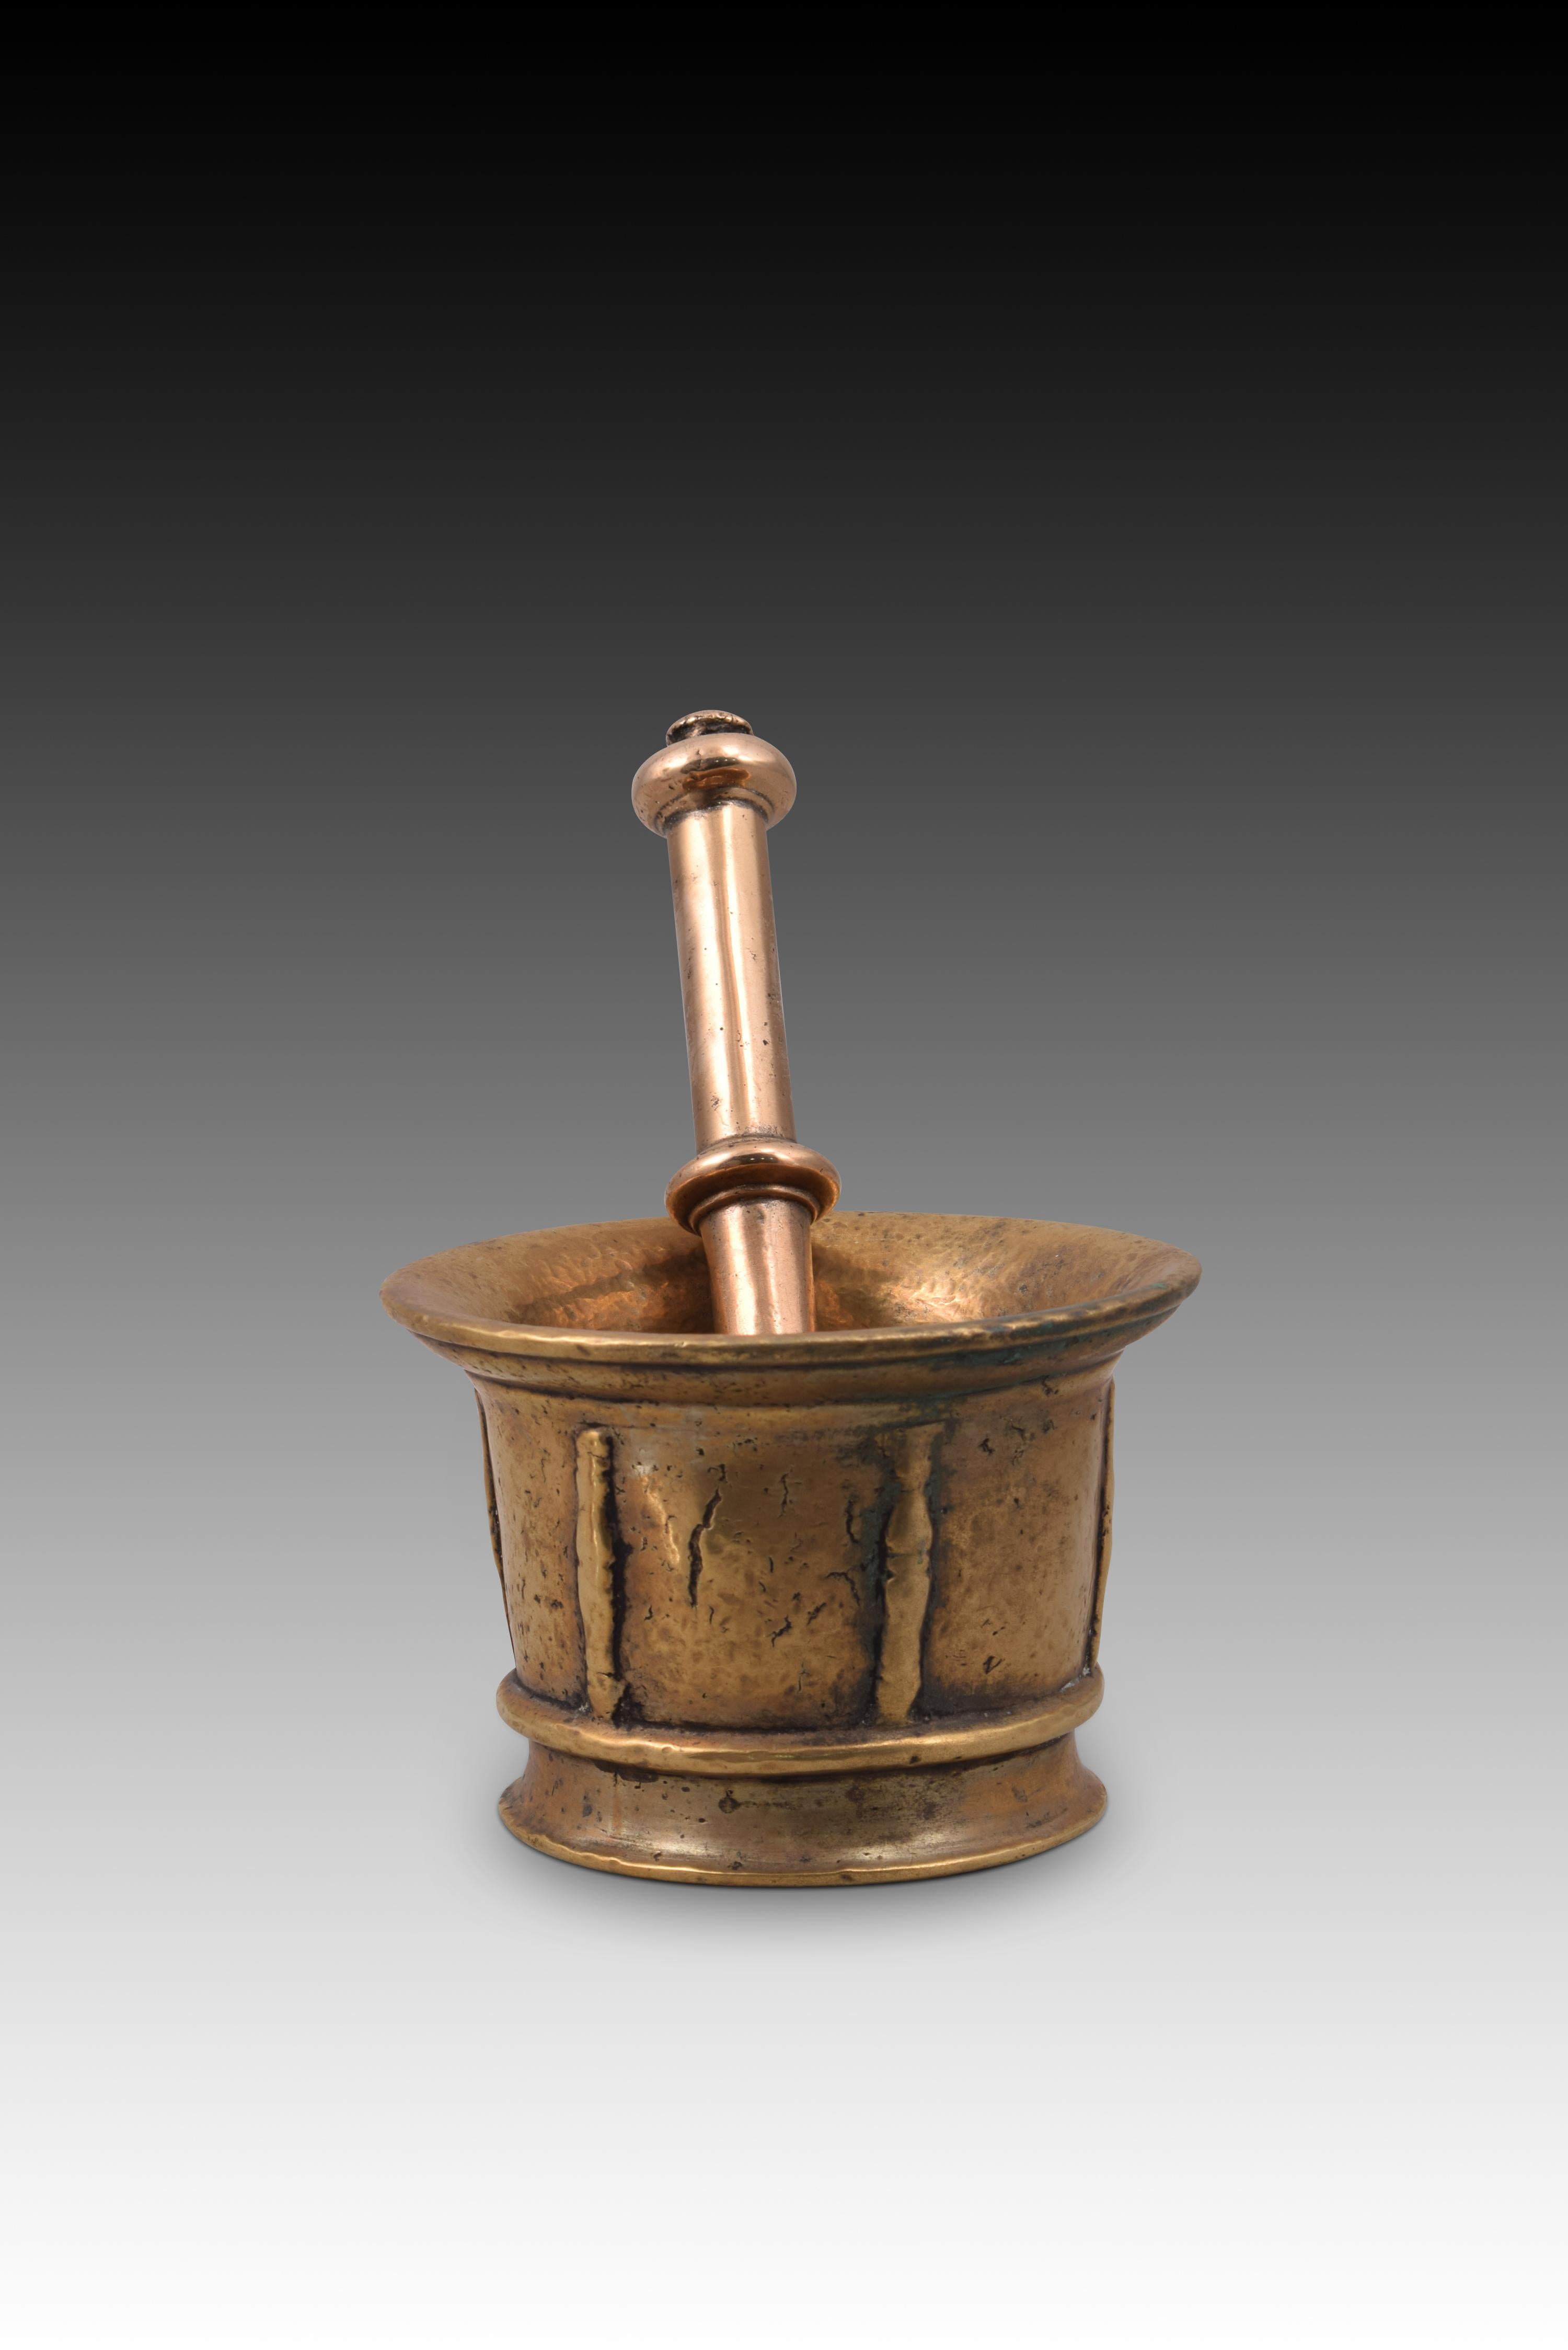 Mortar with hand. Bronze. XVII century. 
Mortar with a circular base, cylindrical body and slightly outwardly flared mouth, decorated with a series of smooth horizontal moldings arranged both in the lower and upper areas and with simple vertical